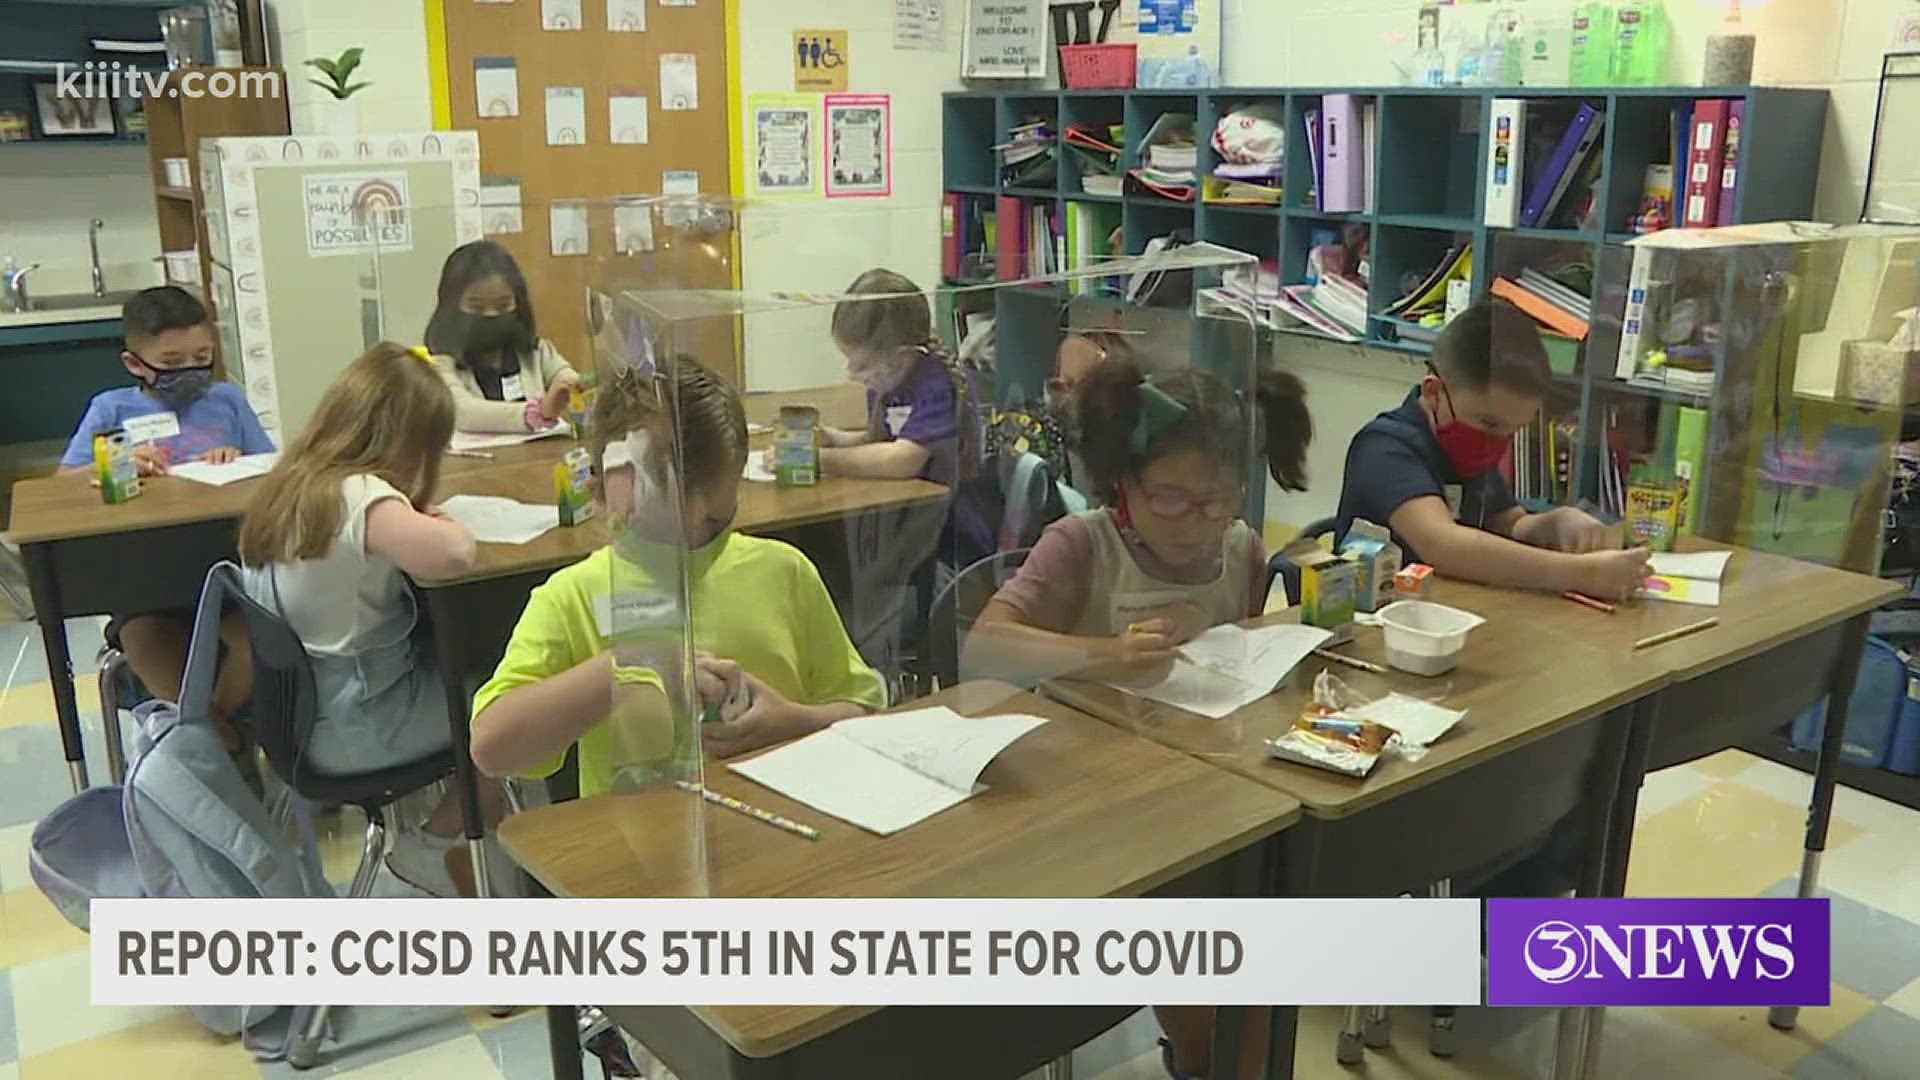 According to an article from the Texas Tribune, Texas school in 340 districts reported over 14,000 new COVID-19 cases from August 16 to August 22.